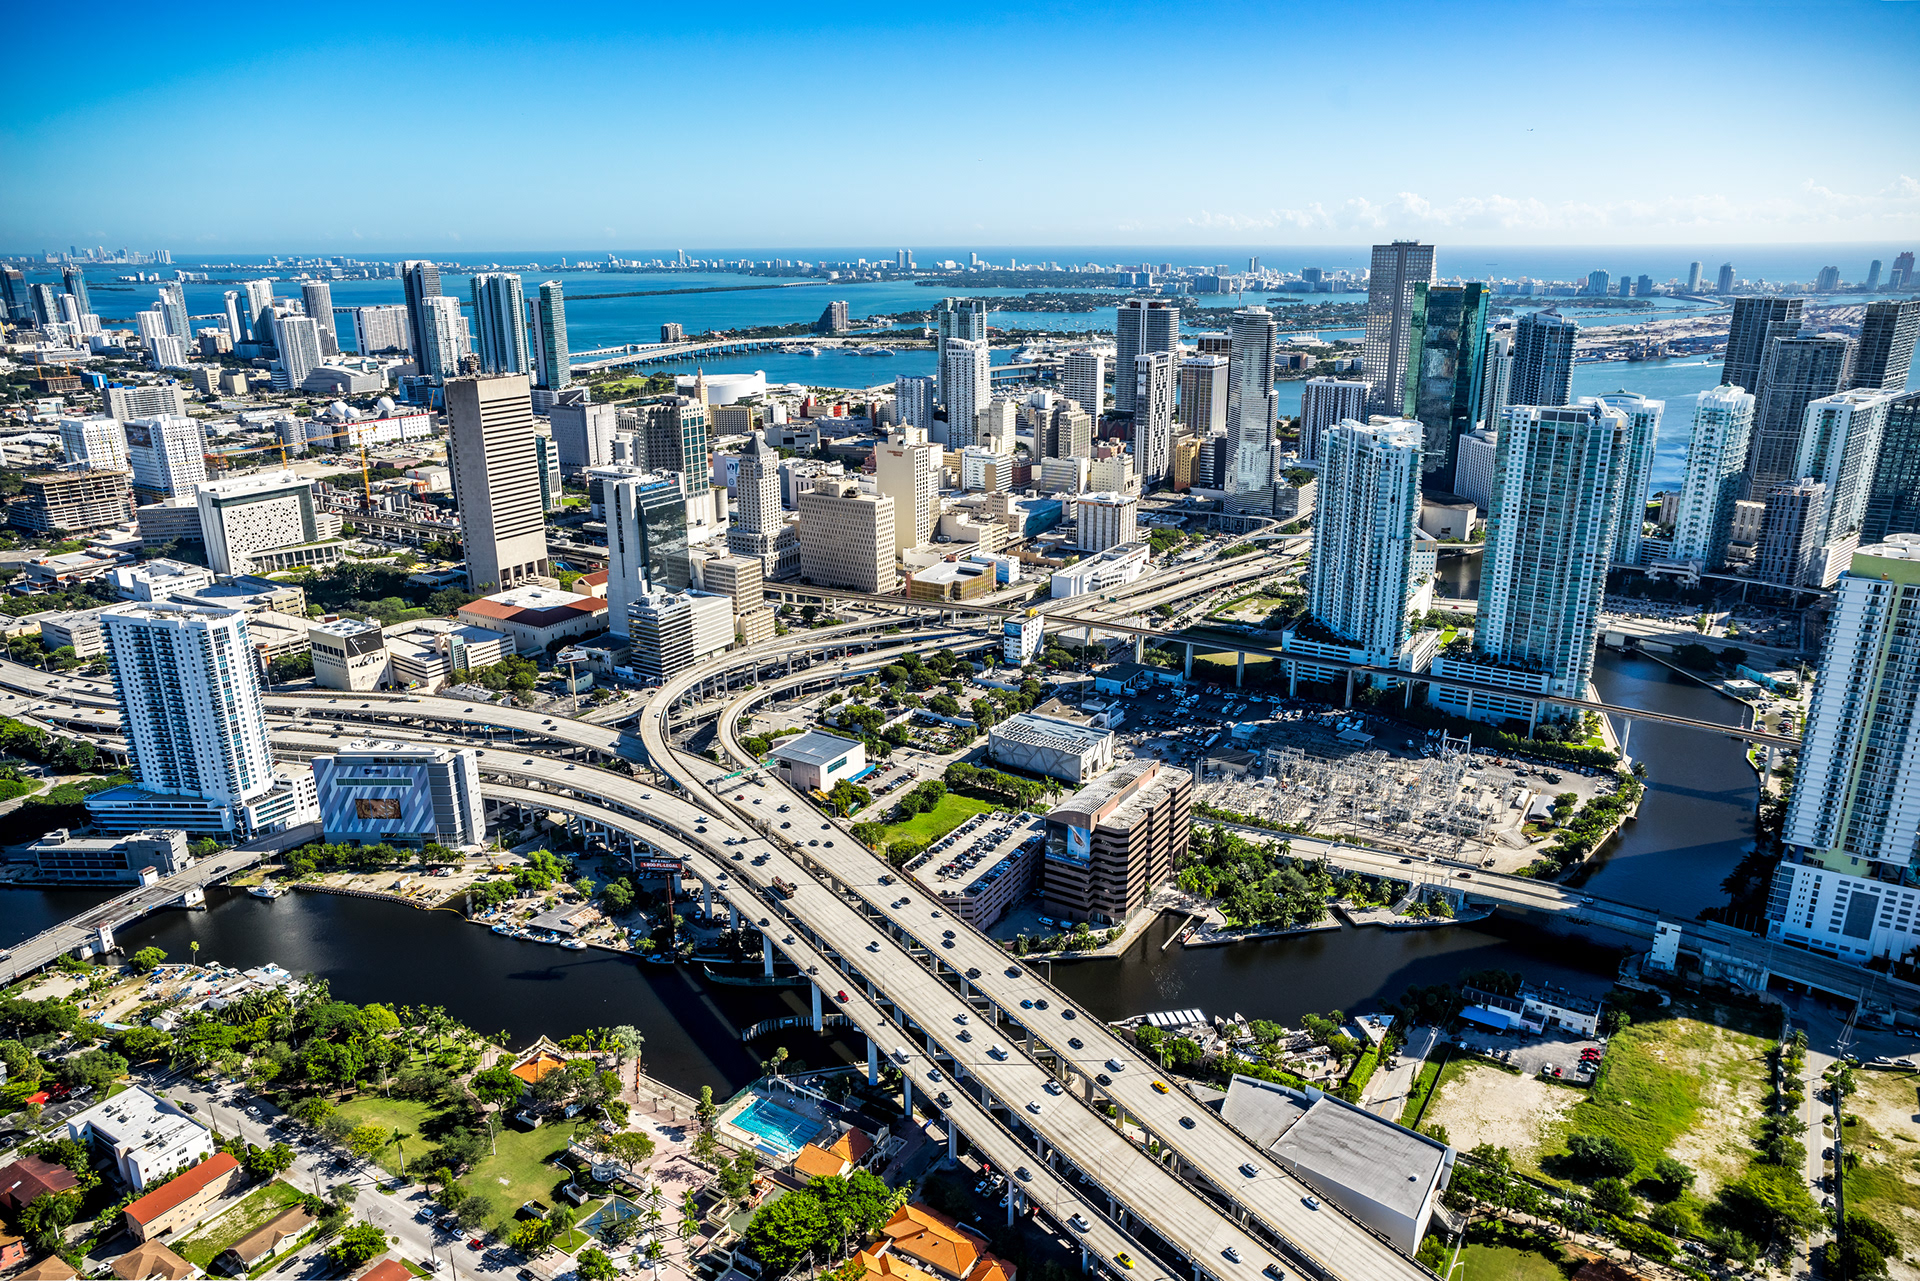 Tourism in Miami sets record in 2018, surpassing 2017 gains